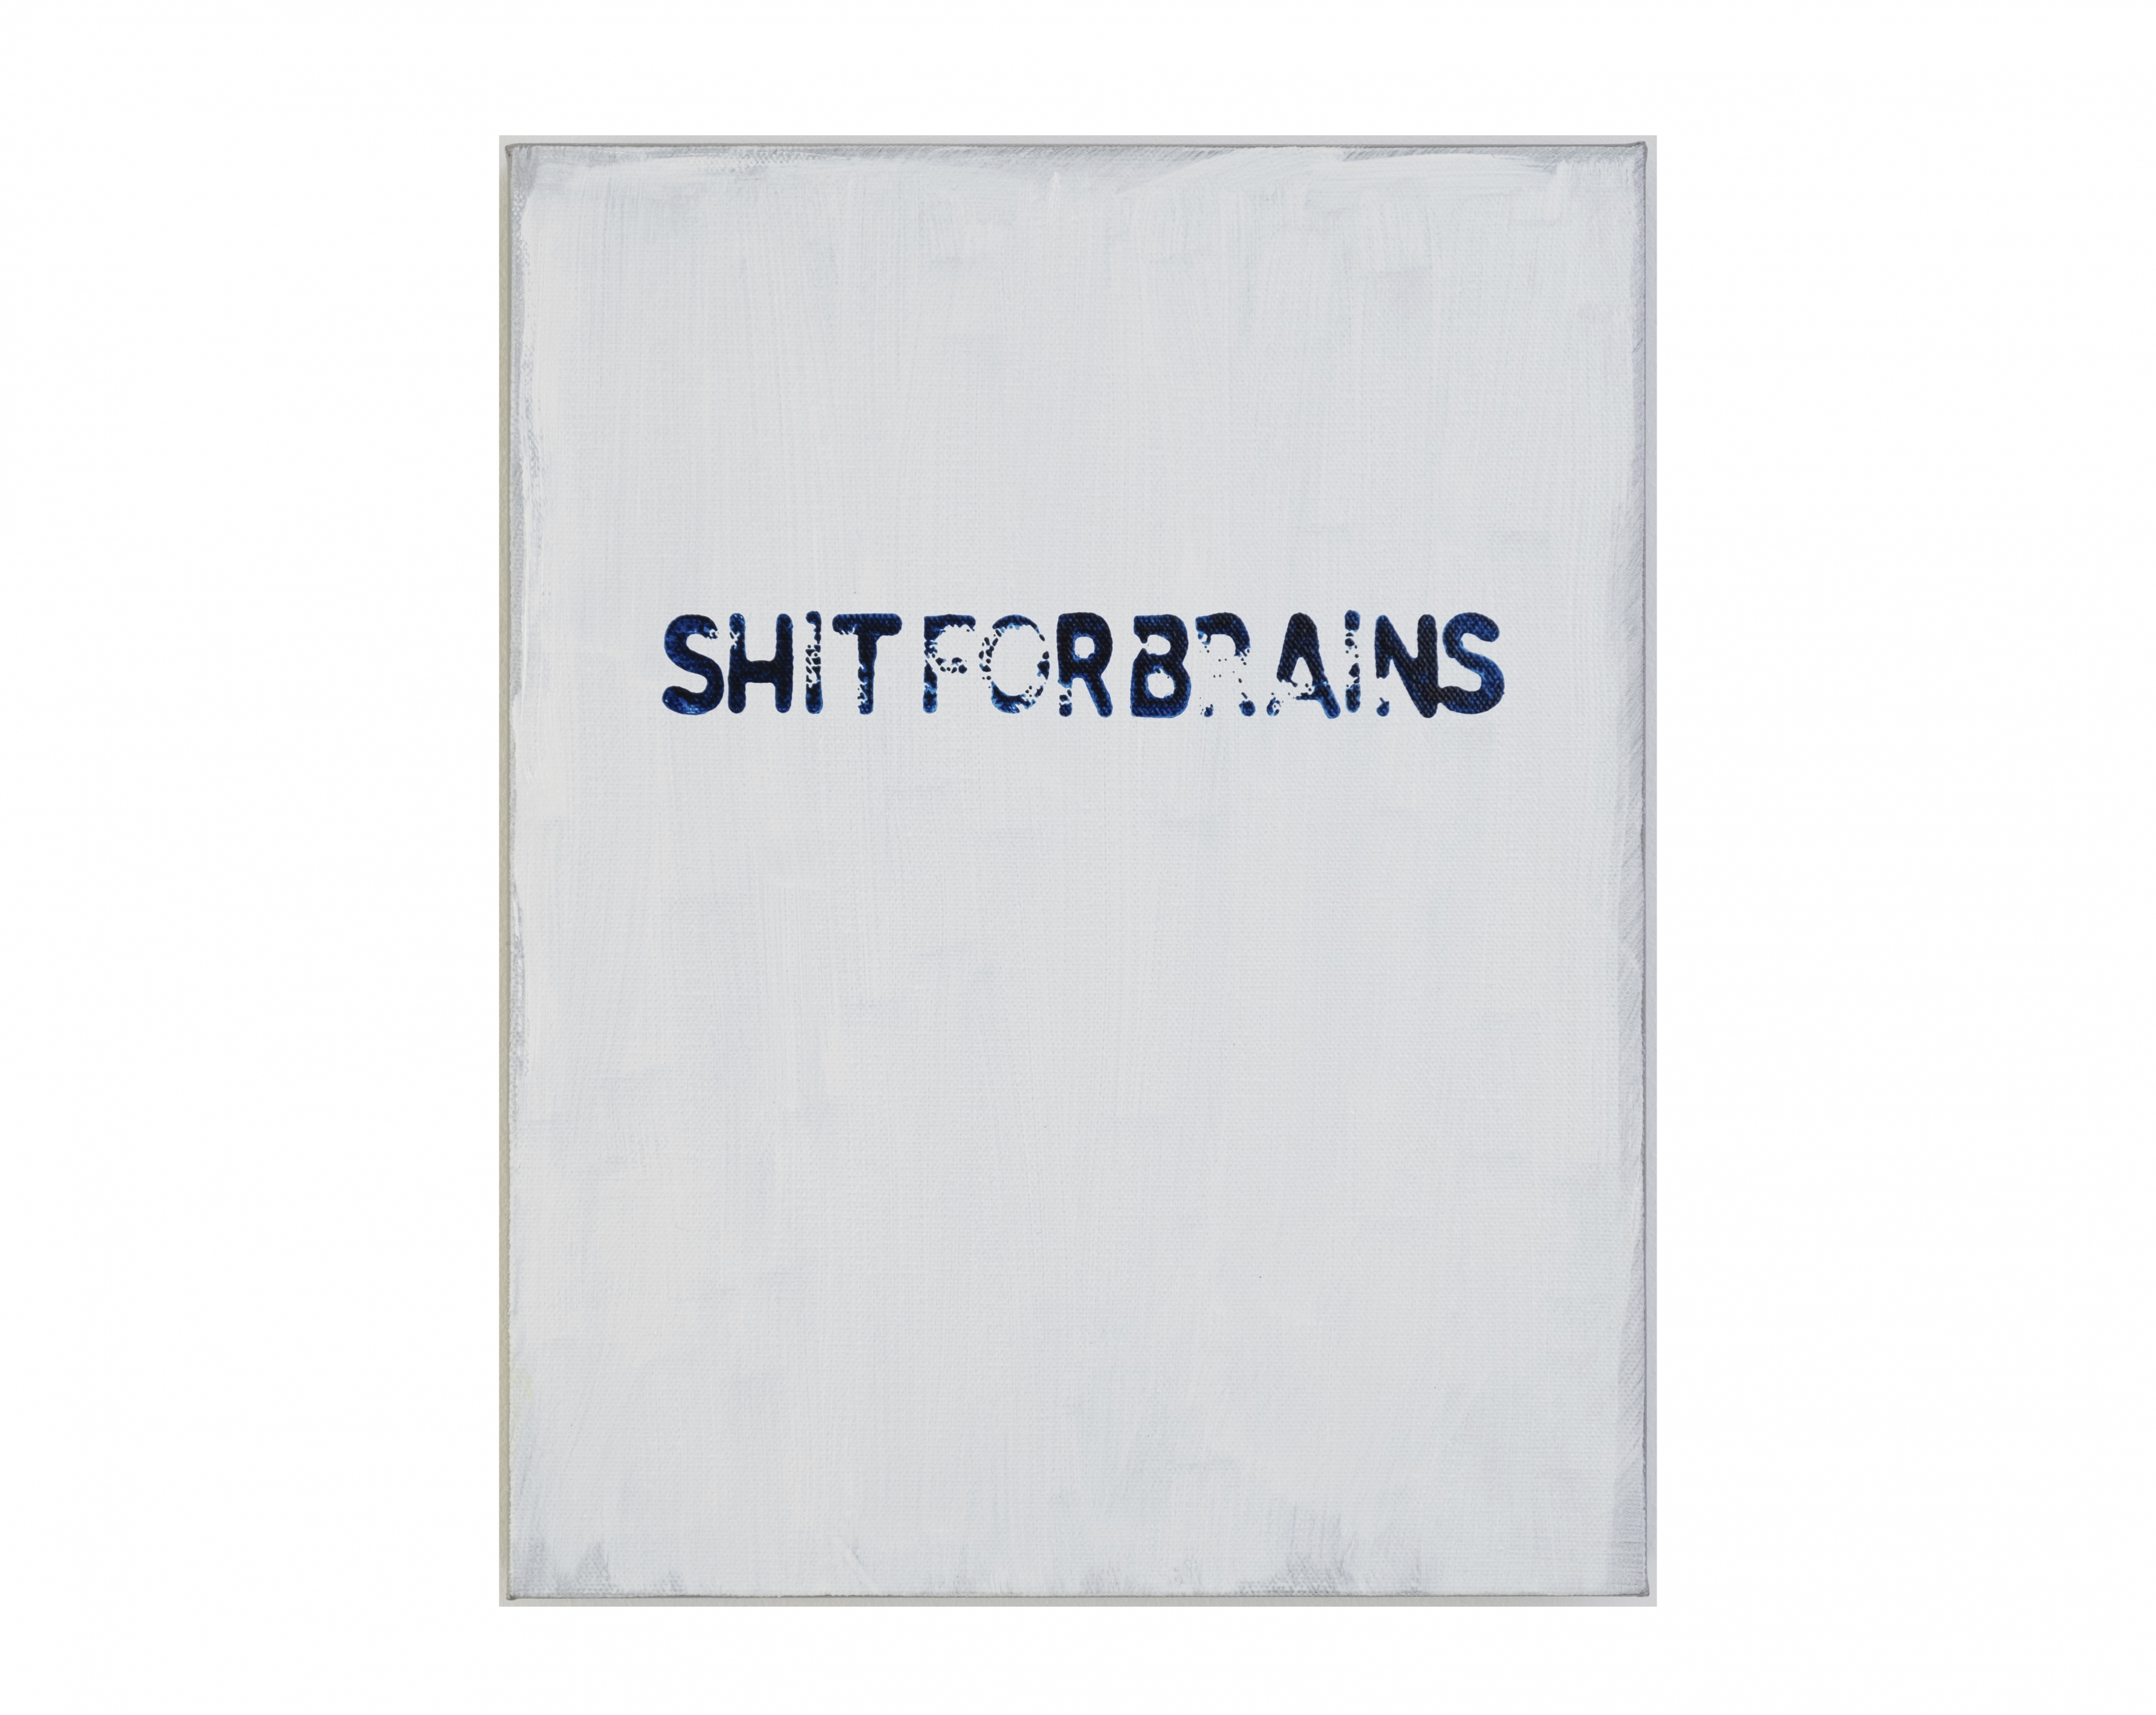 MEL BOCHNER

&nbsp;

Shit for Brains
2020
oil on canvas
14 x 11 inches
(35.6 x 27.9 cm)
PF5946




INQUIRE